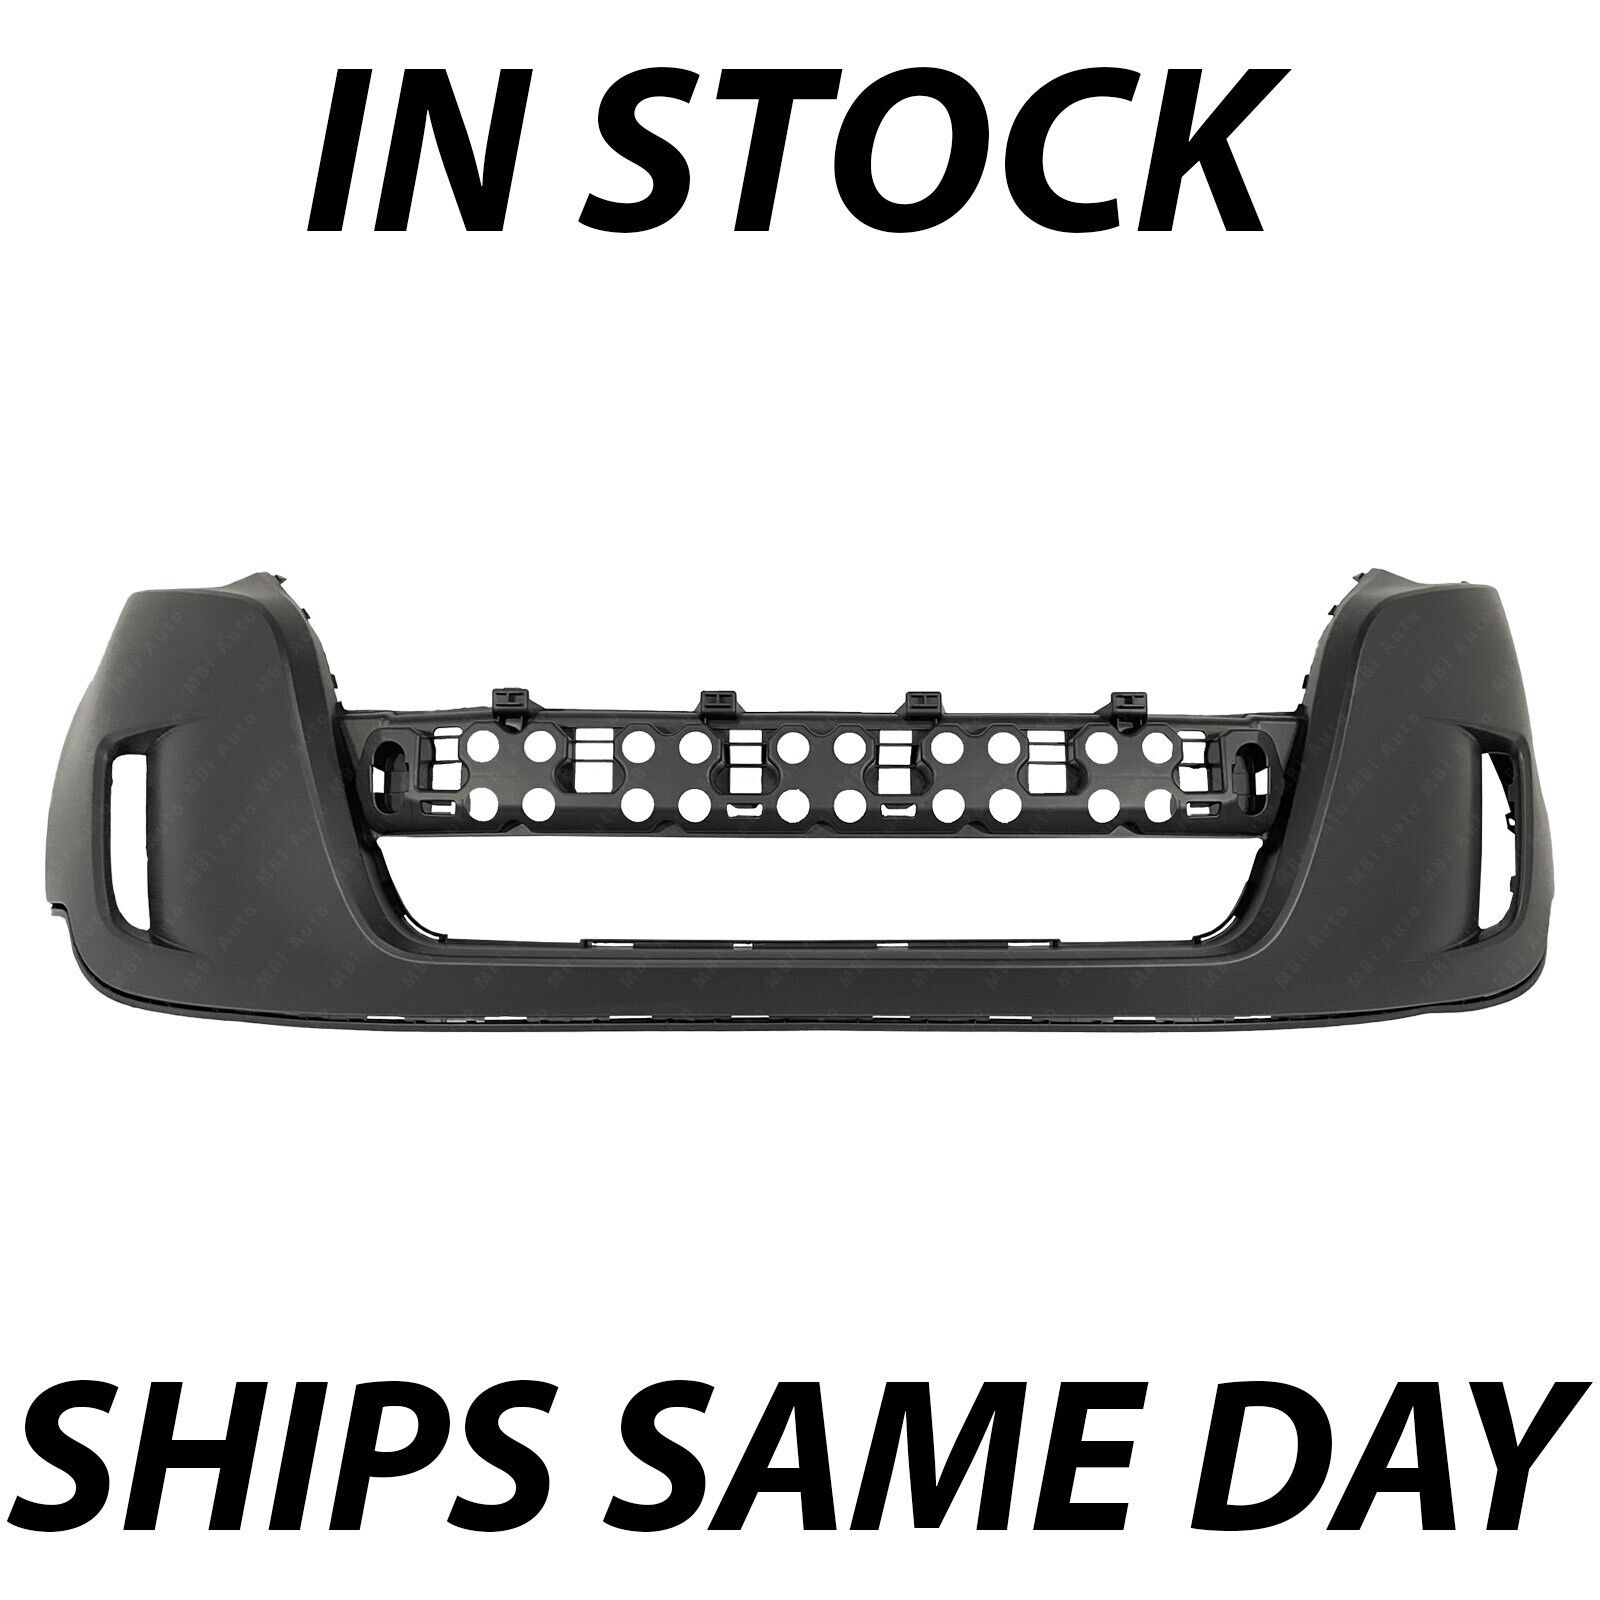 NEW Primered - Front Bumper Cover Fascia Replacement for 2011-2014 Ford Edge SUV